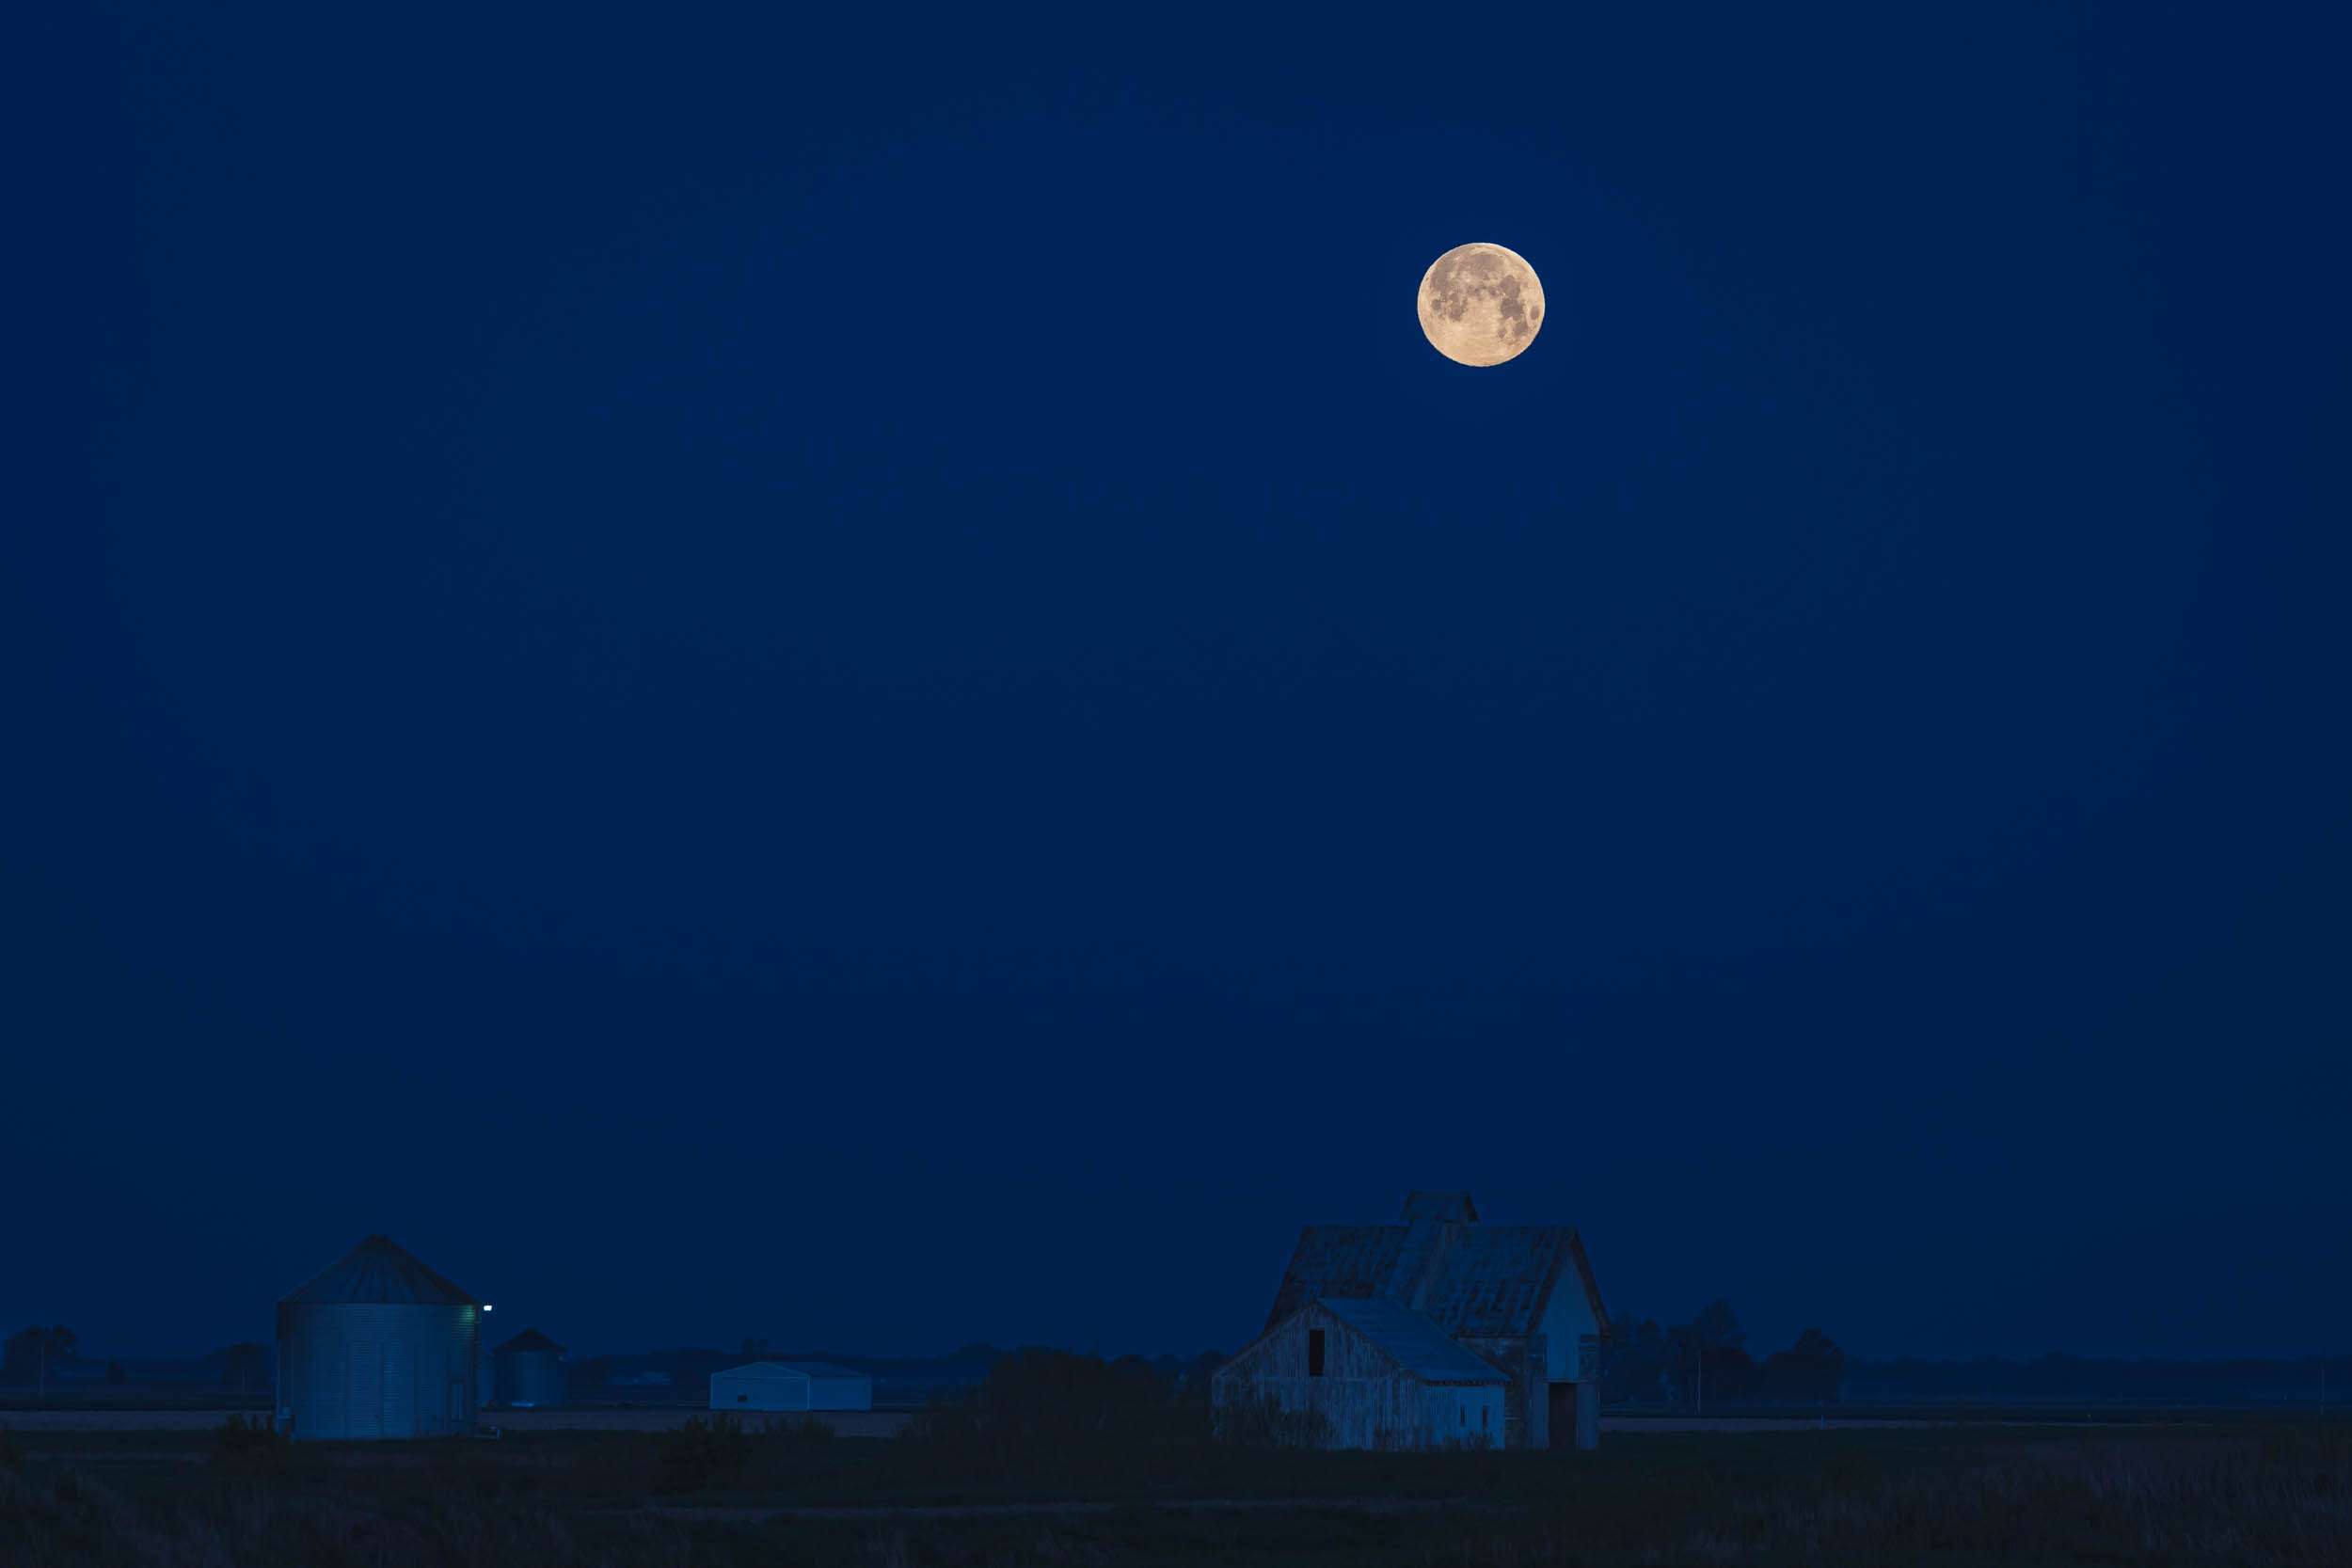 The moon shining above some farm buildings in a deep blue glow just before sunrise